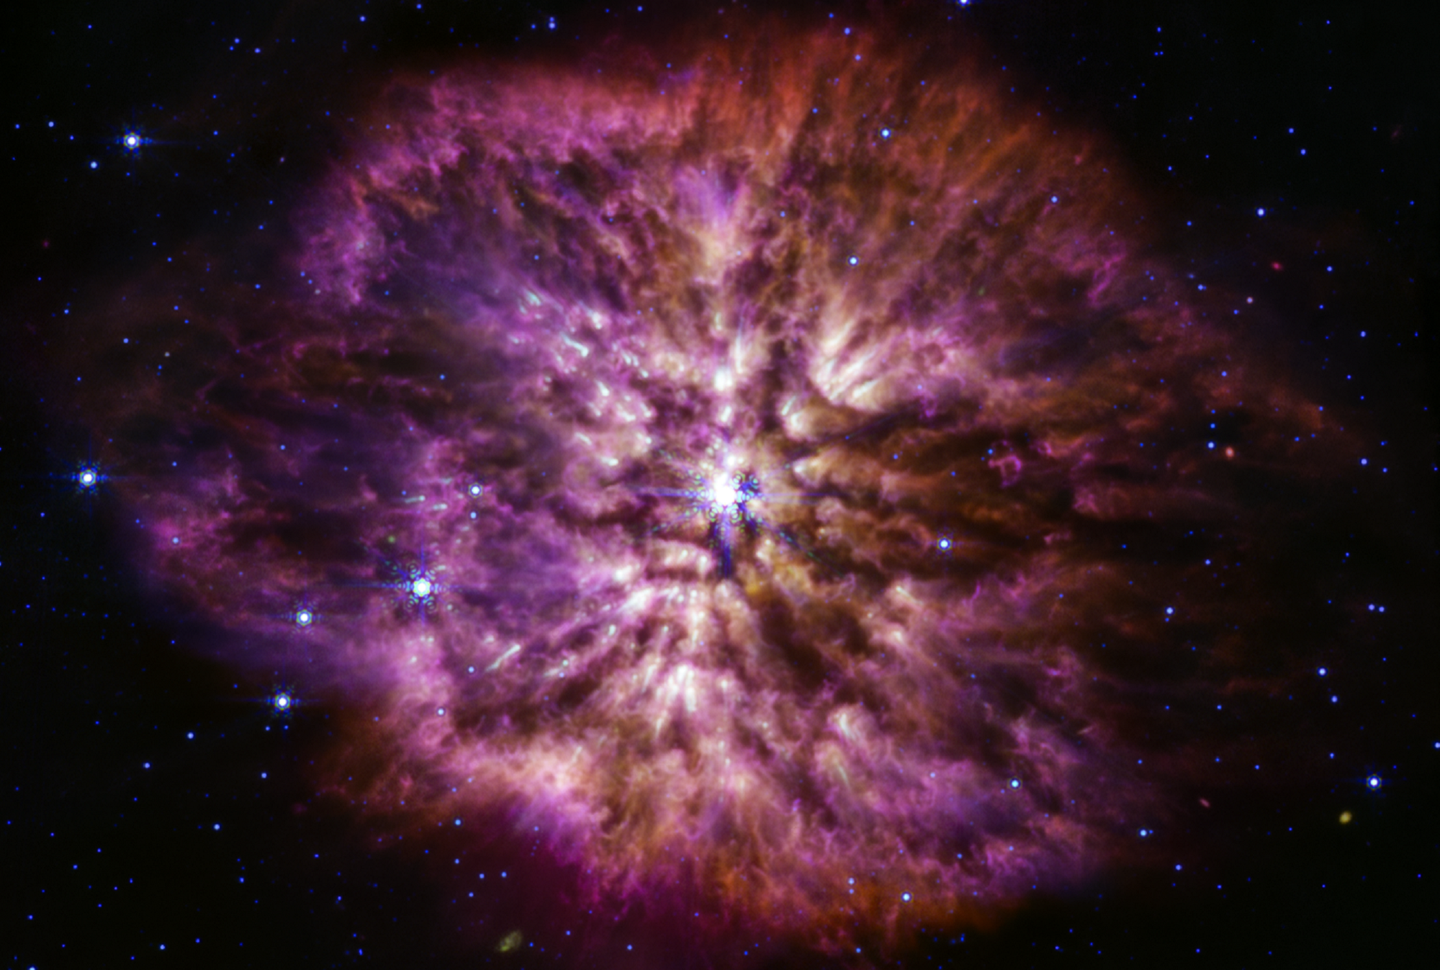 WR 145 star in pre-supernova state with white bright core and red and purple dust and matter clouding around it. Taken by NASA's James Webb Space Telescope.